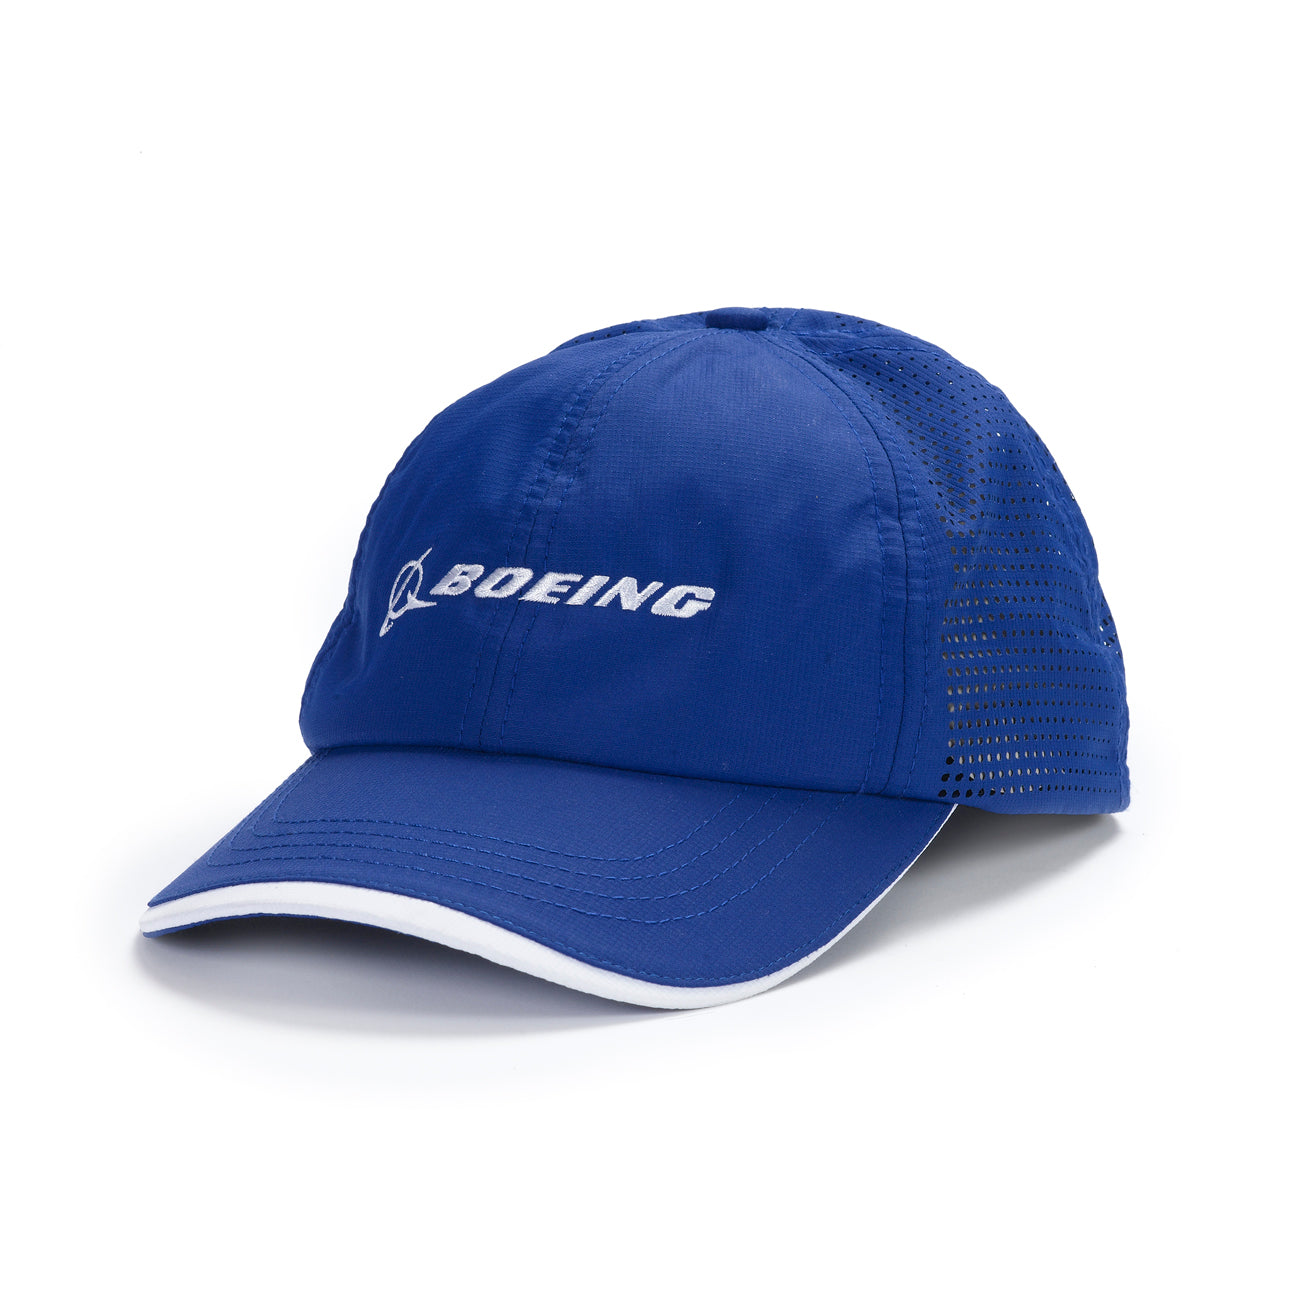 Boeing Logo Performance Hat (avail in 3 colors)